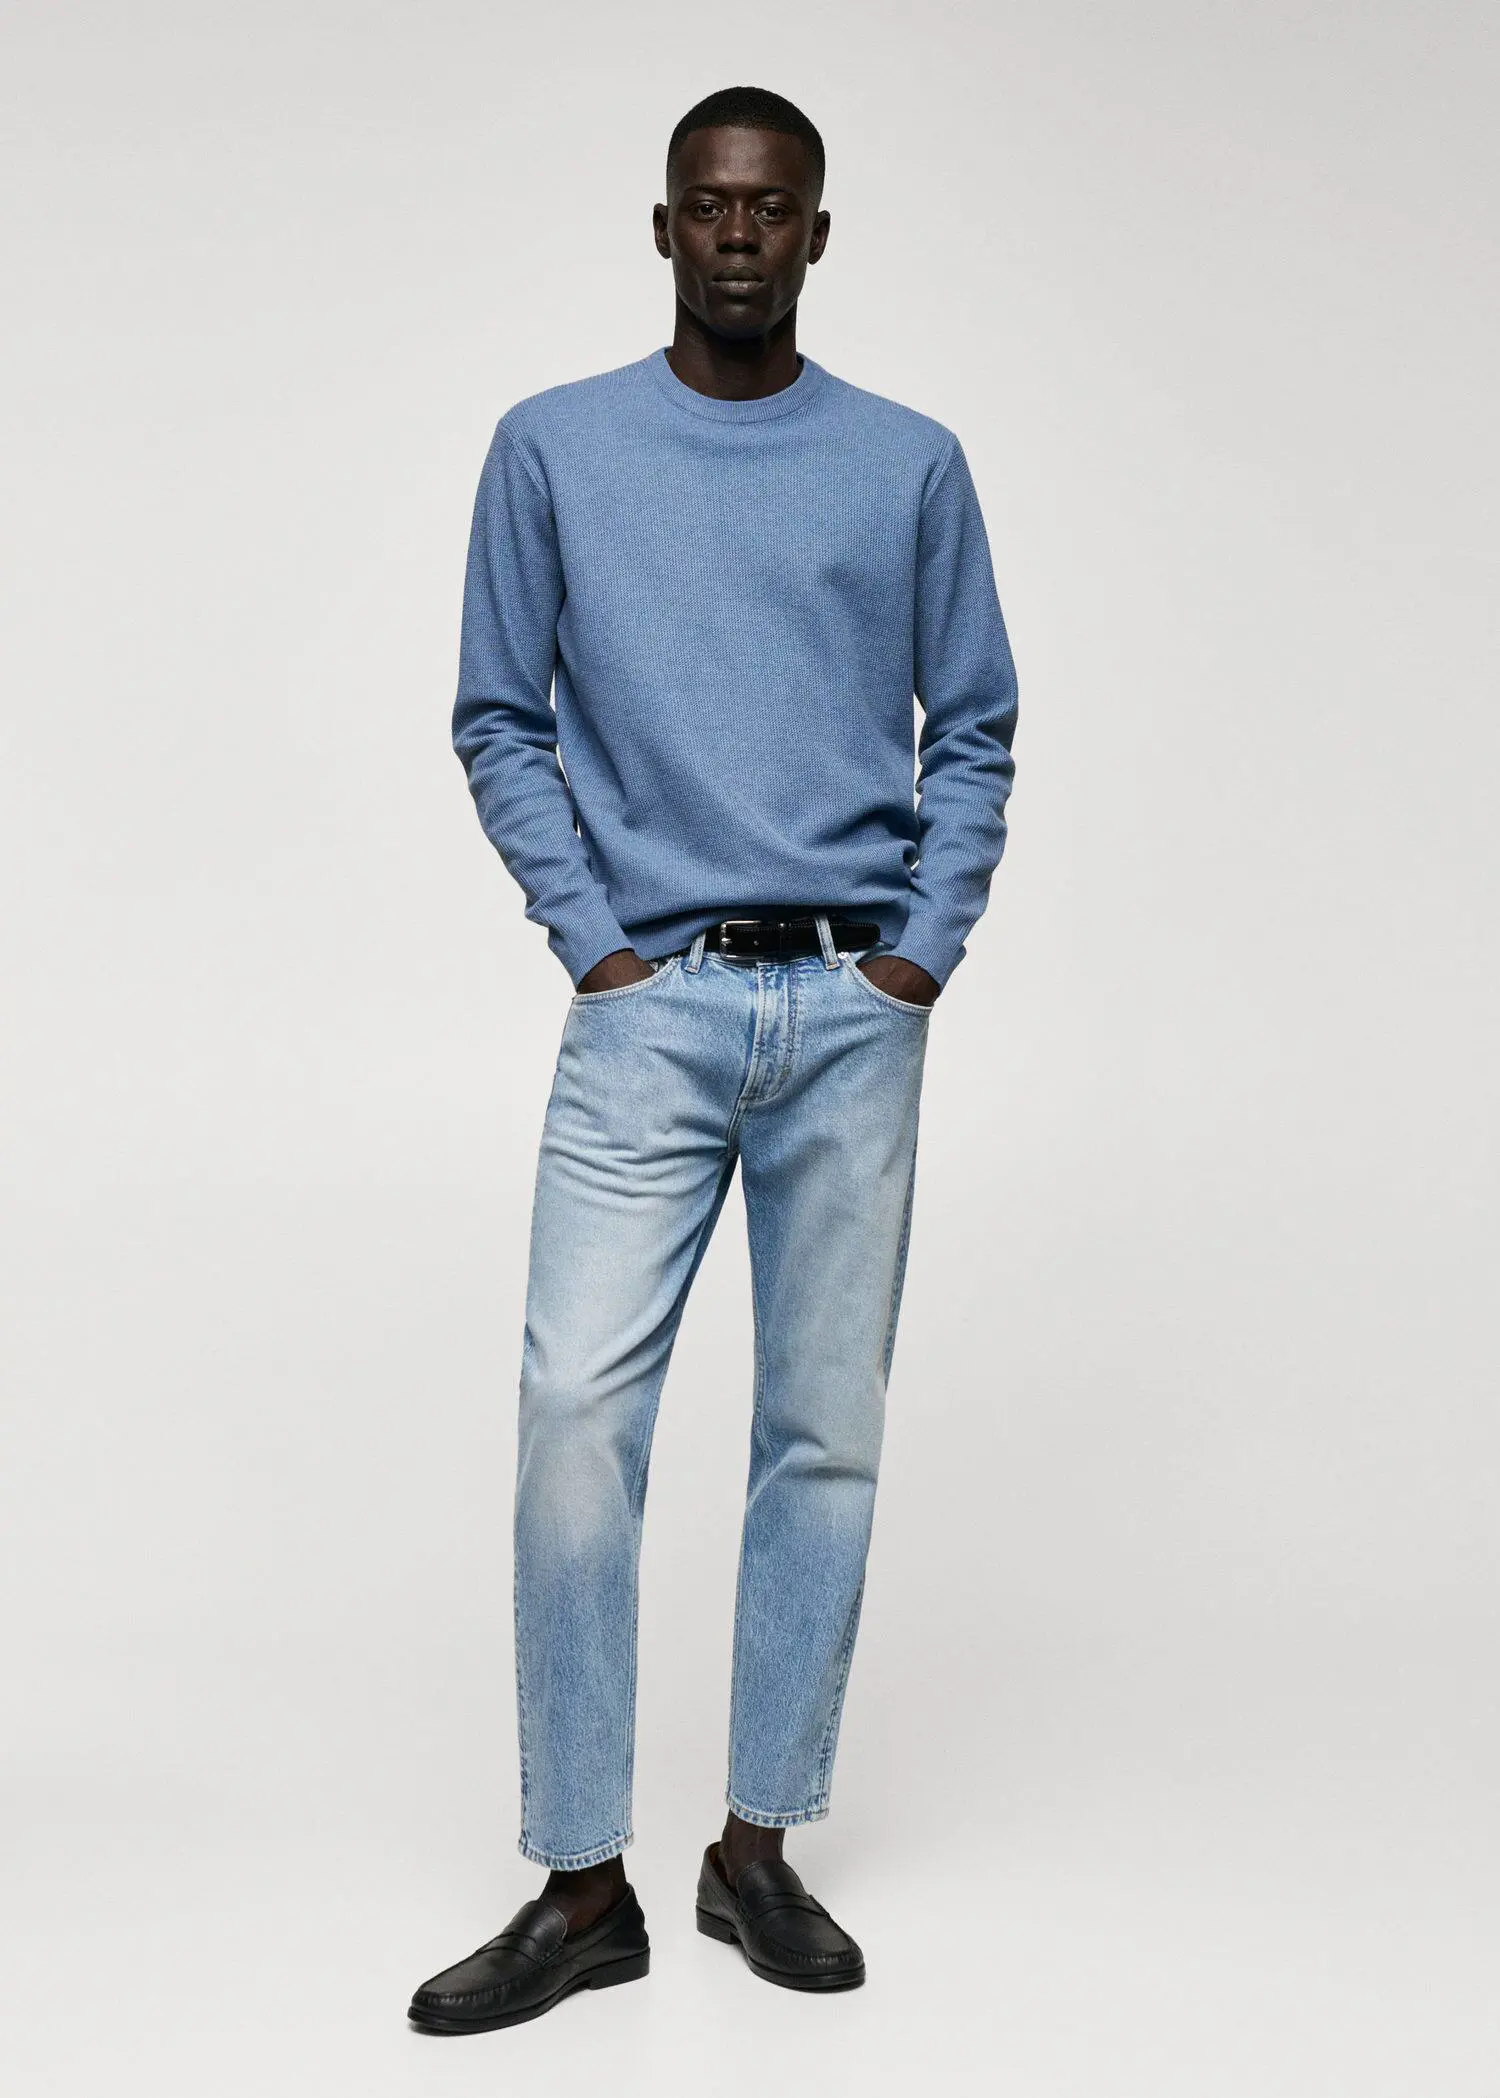 Mango Structured cotton sweater. a man in a blue sweater and jeans. 